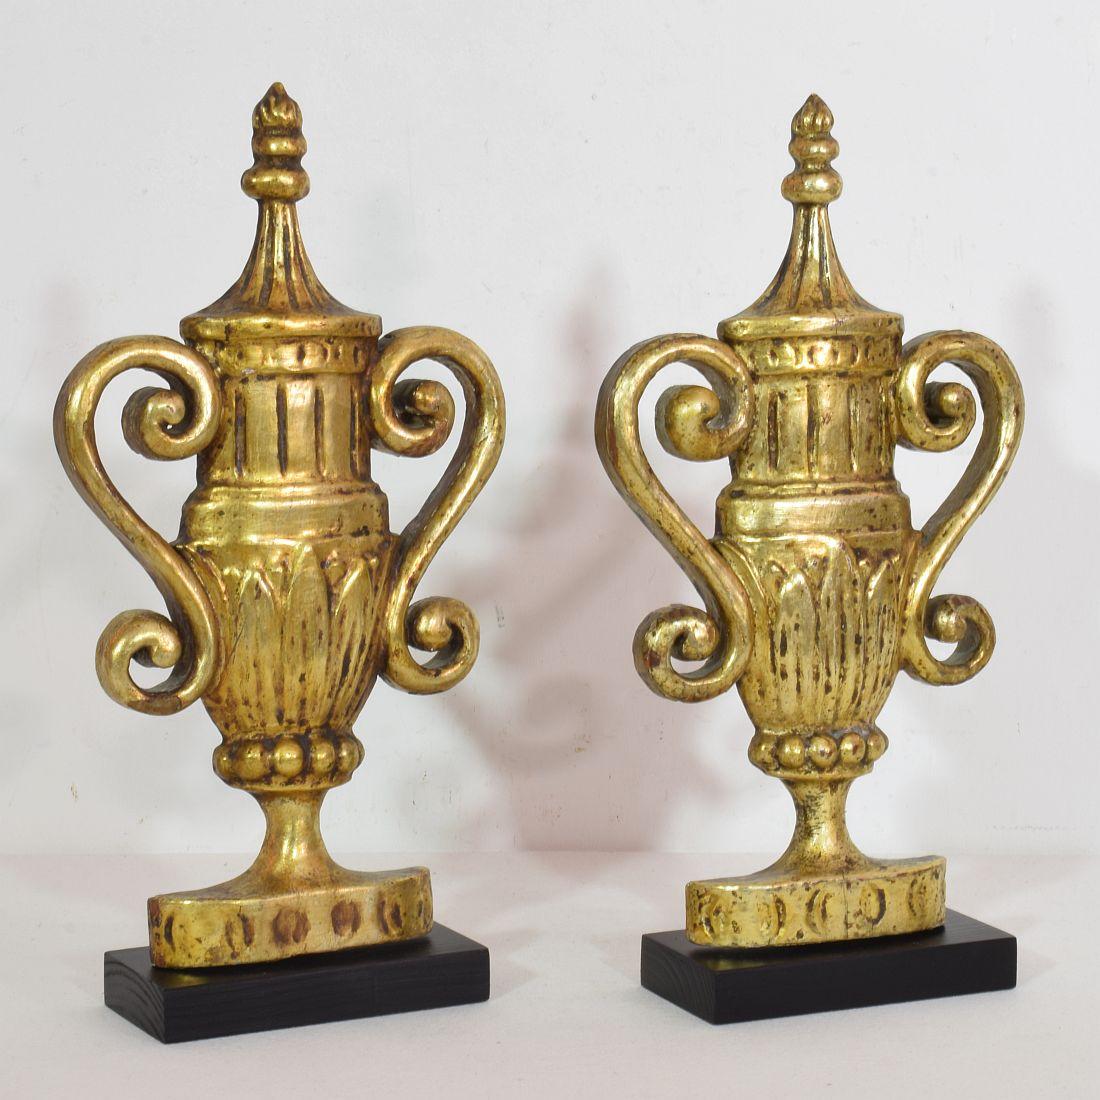 Neoclassical Pair of 19th Century French Carved Giltwood Ornaments